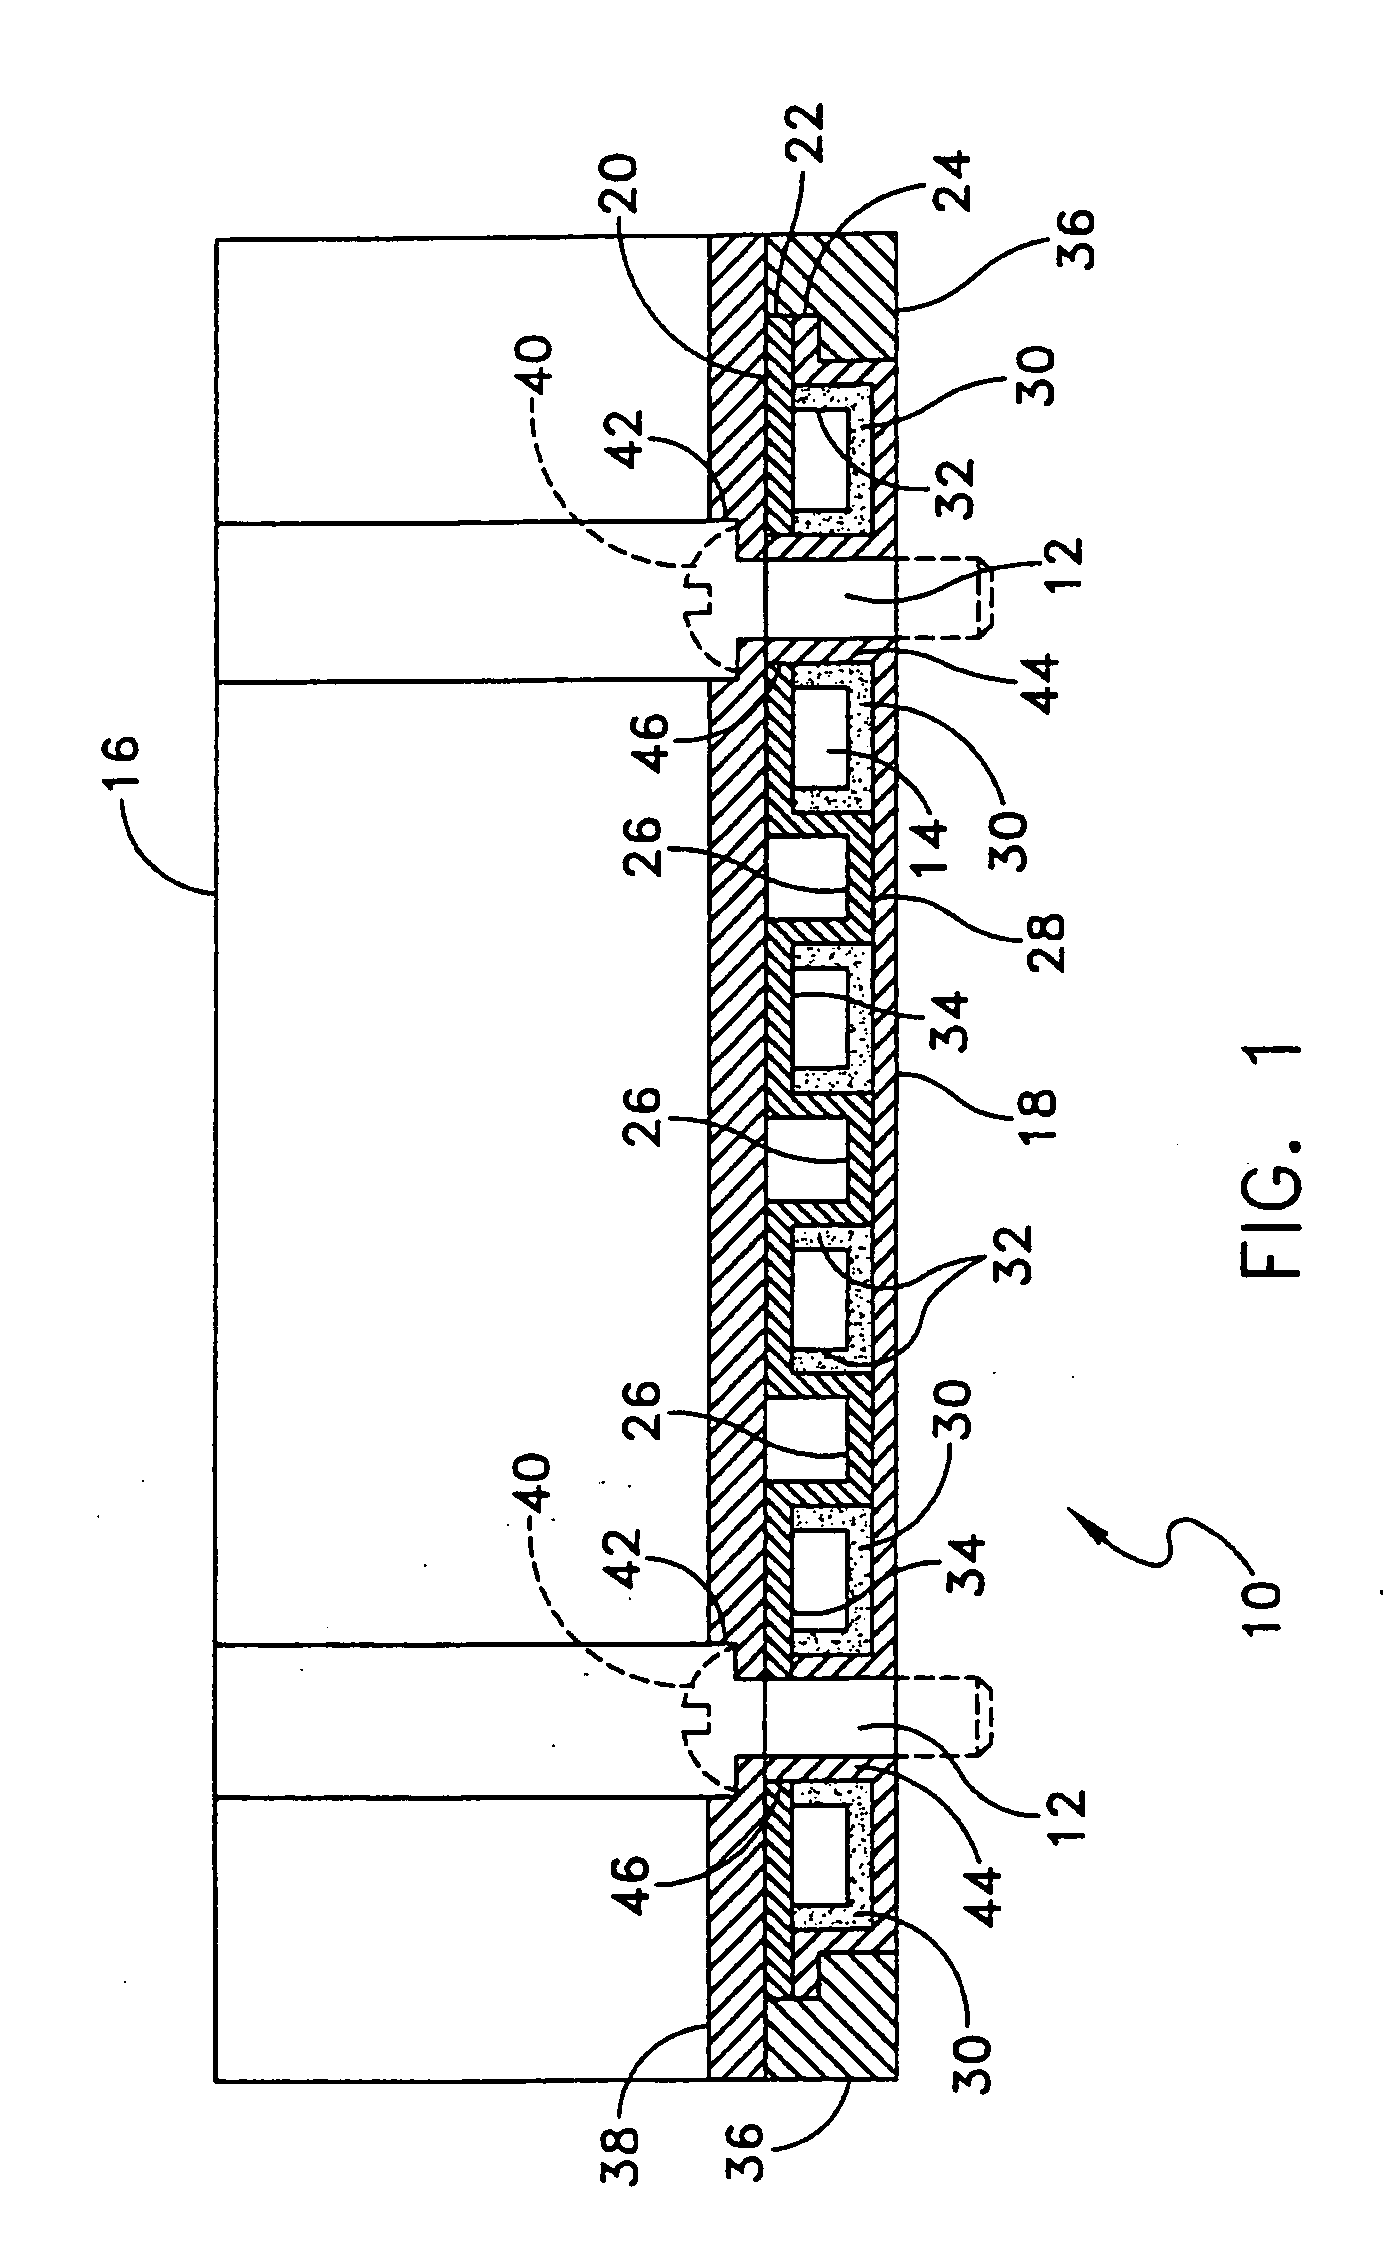 Integrated circuit heat pipe heat spreader with through mounting holes